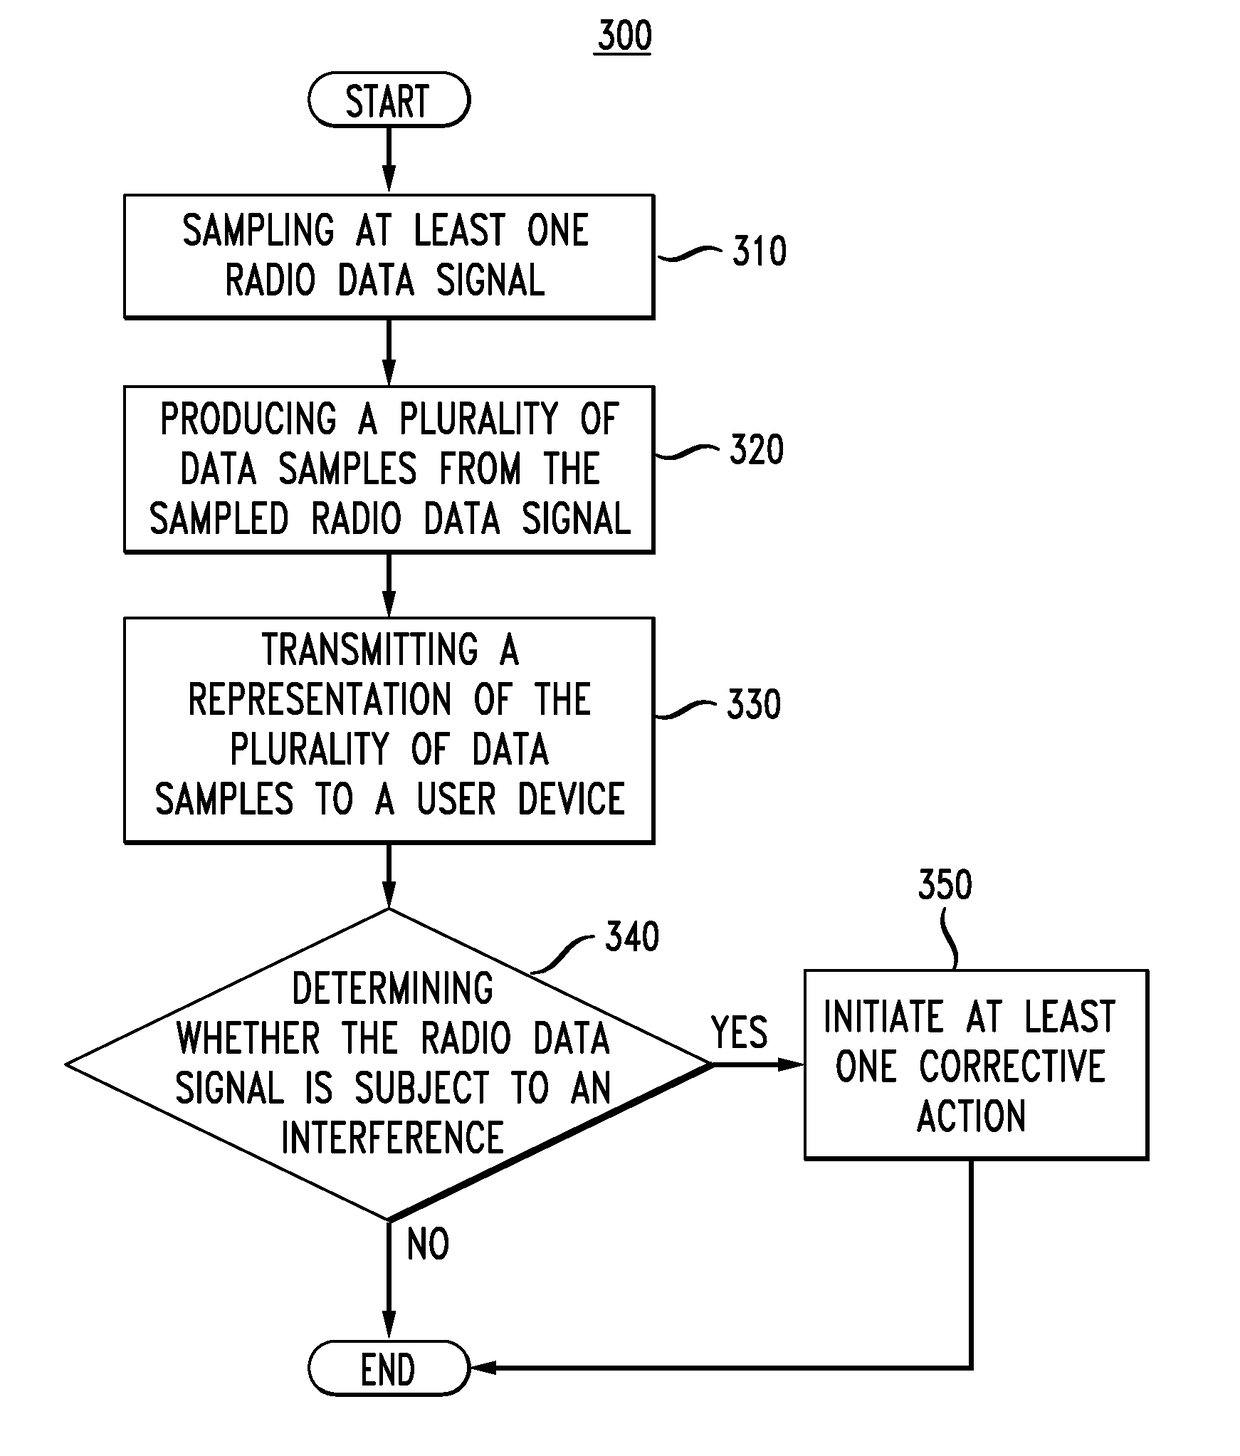 Method and Apparatus for Interference Monitoring of Radio Data Signals